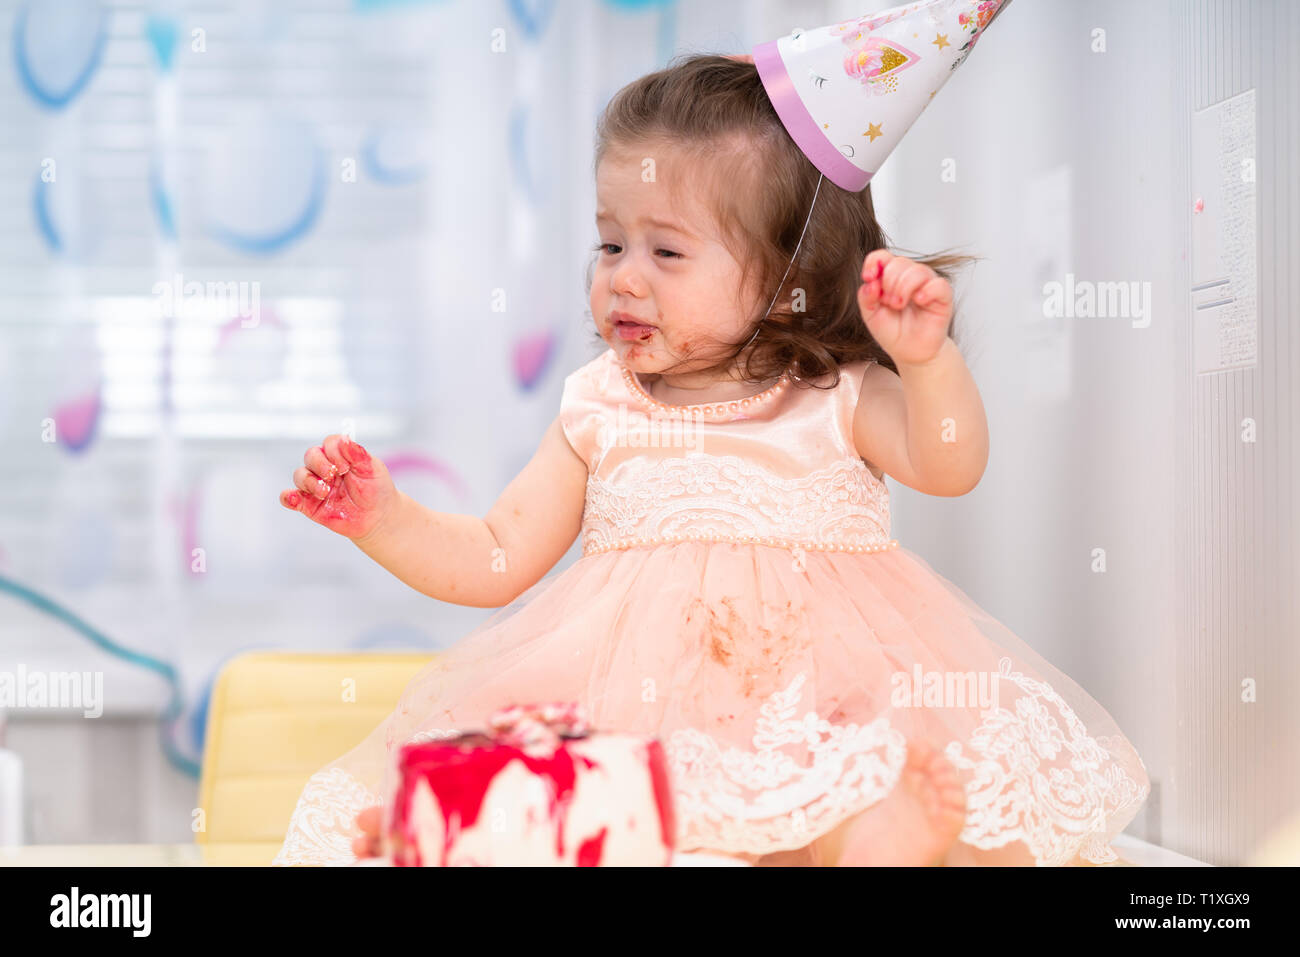 Little girl enjoying her birthday party sitting in front of the cake with sticky hands and face wearing a hat and pink dress Stock Photo